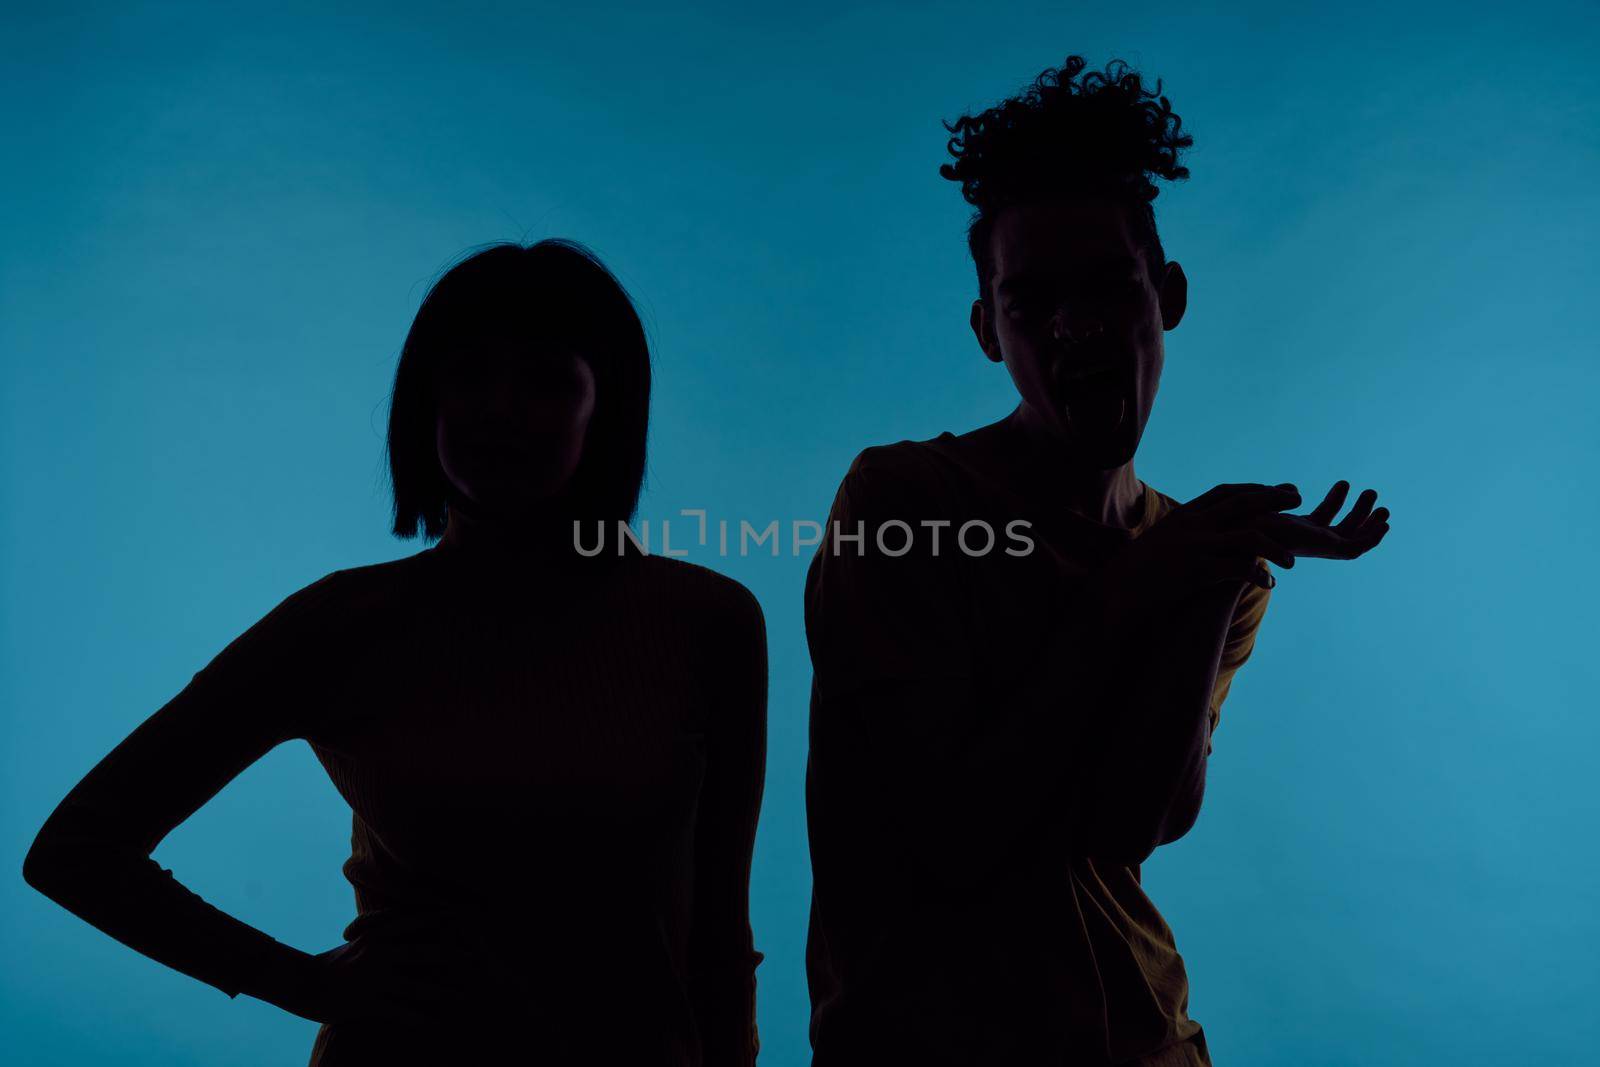 kinky guy and girl together friendship fun blue background. High quality photo